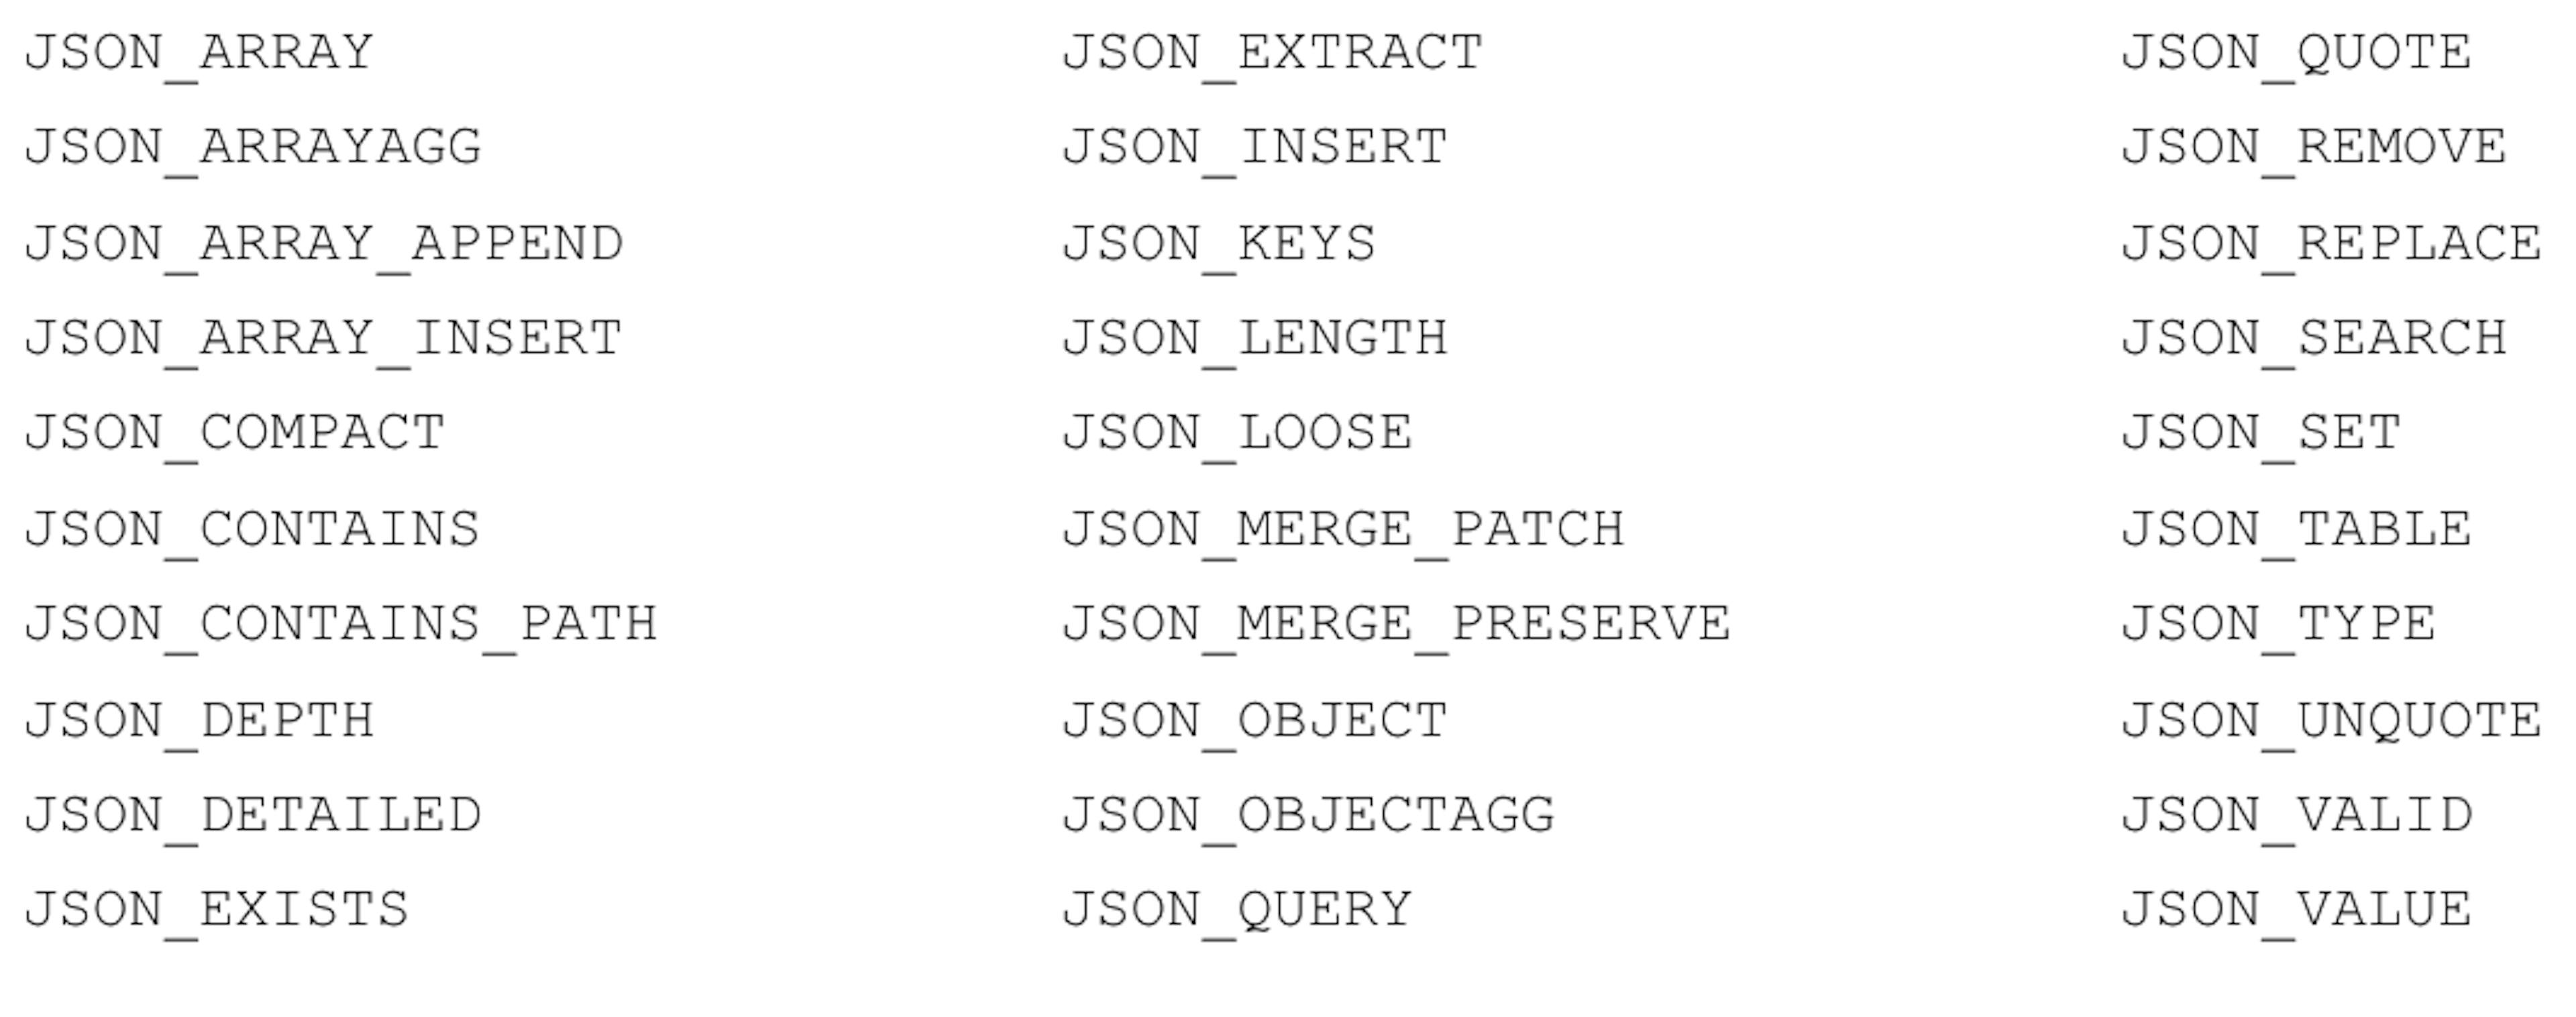 The full list of JSON functions currently available within MariaDB.